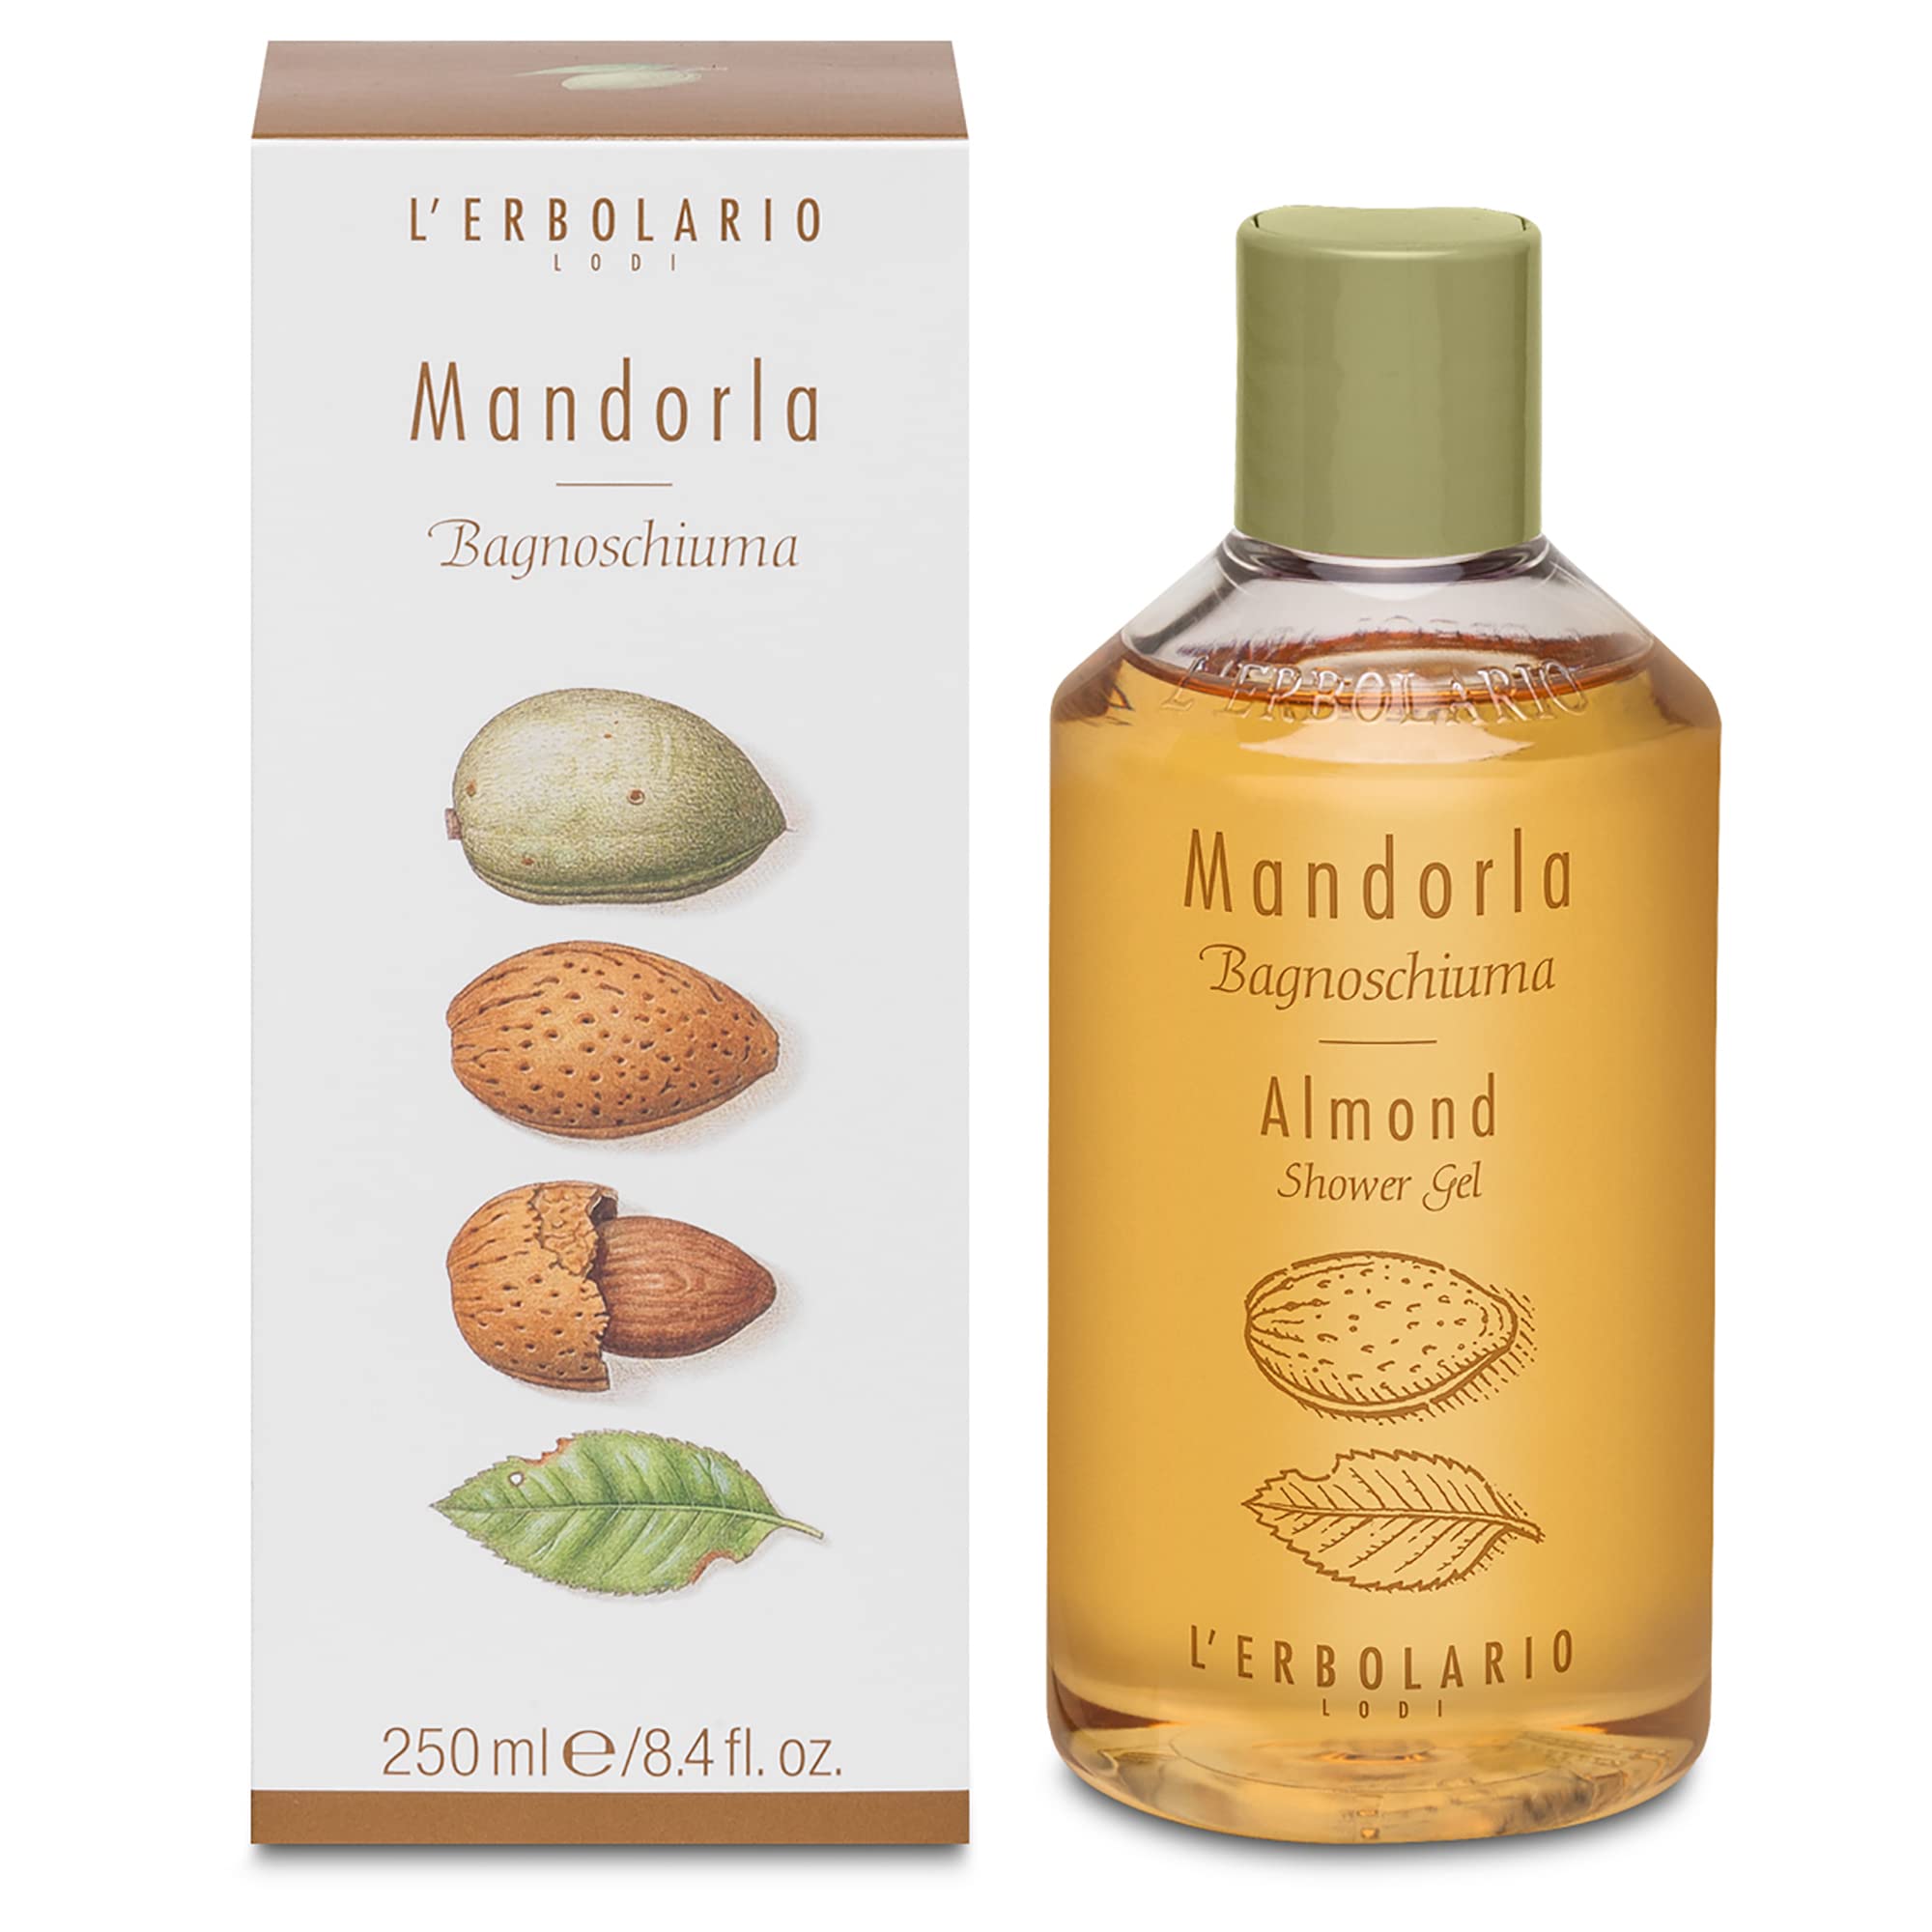 L'Erbolario Almond Shower Gel - Rich, Creamy Foam - Sensual Fragrance - Moisturizes The Body While Delicately Cleaning It - Makes Skin Smooth And Velvety To The Touch - Long Lasting Scent - 8.4 Oz